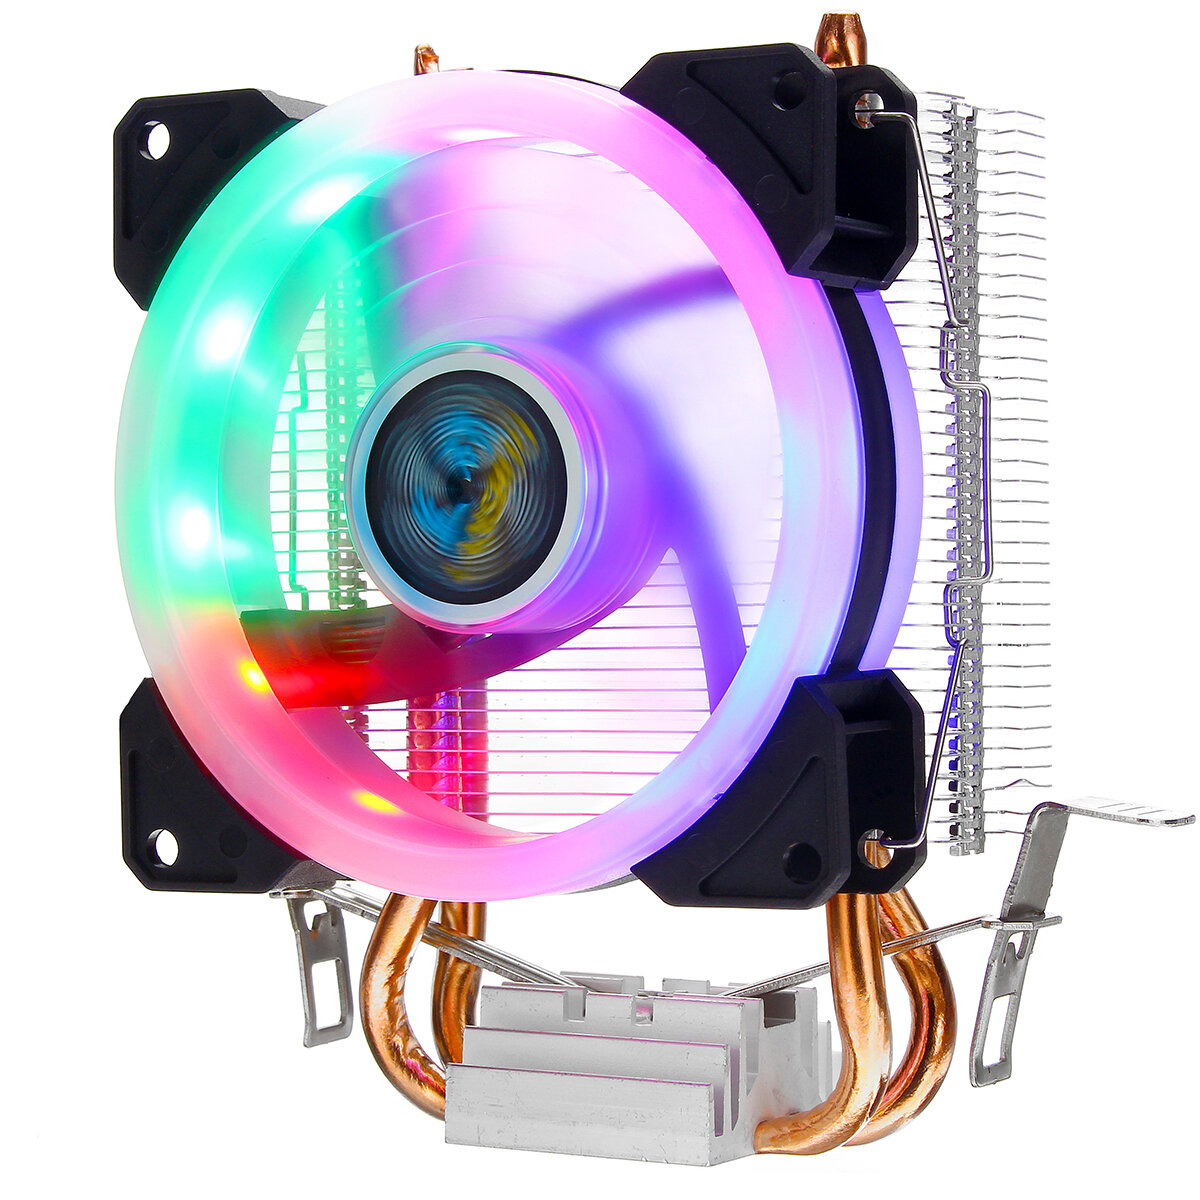 CPU Cooler 2 Heatpipe 4 Pin RGB Cooling Fan For Intel 775/1150/1151/1155/1156/1366 AMD